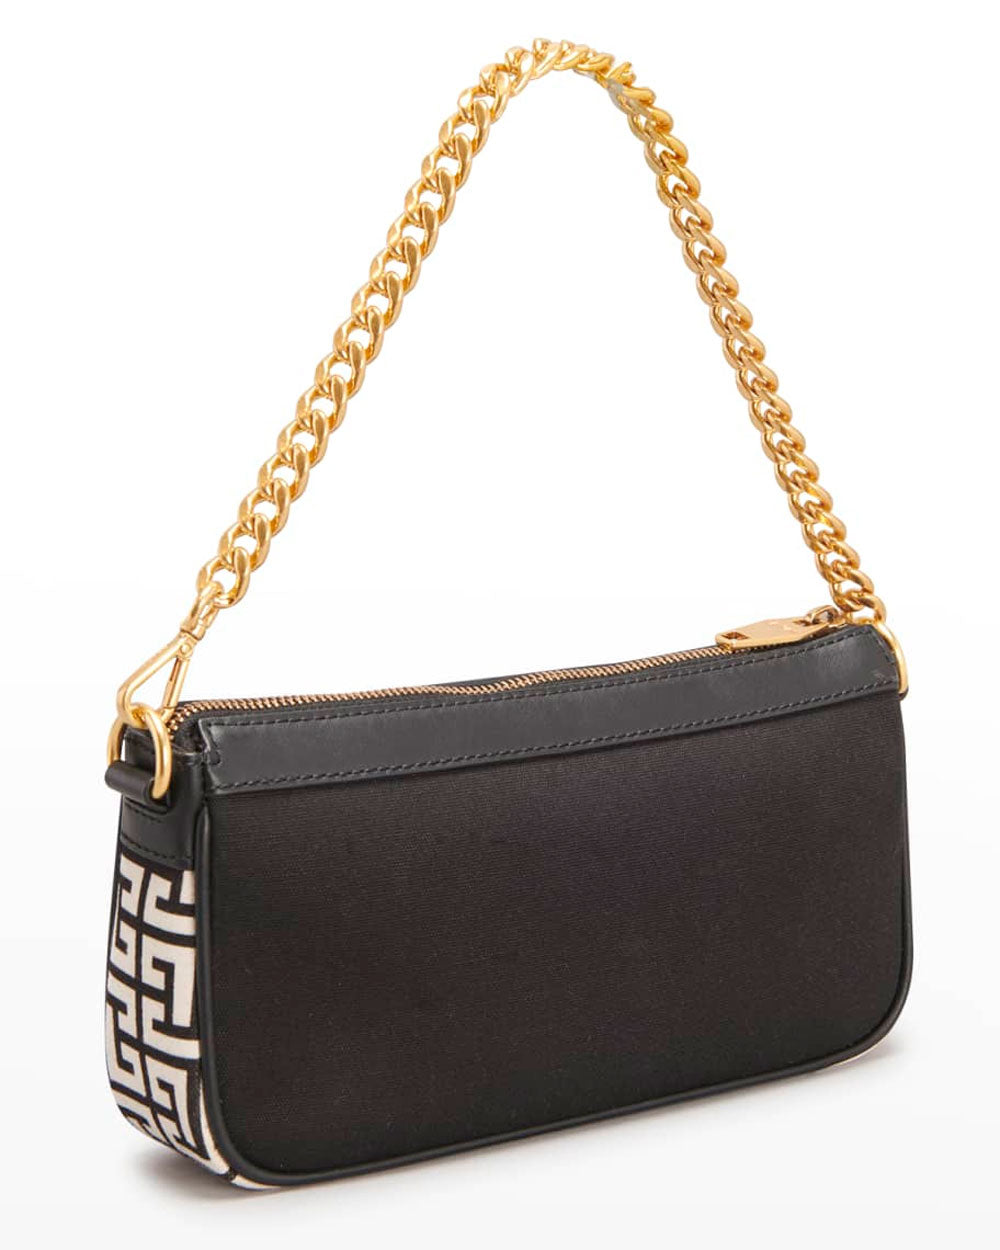 B-Army Logo Monogram Chain Pouch in Noir and Ivory